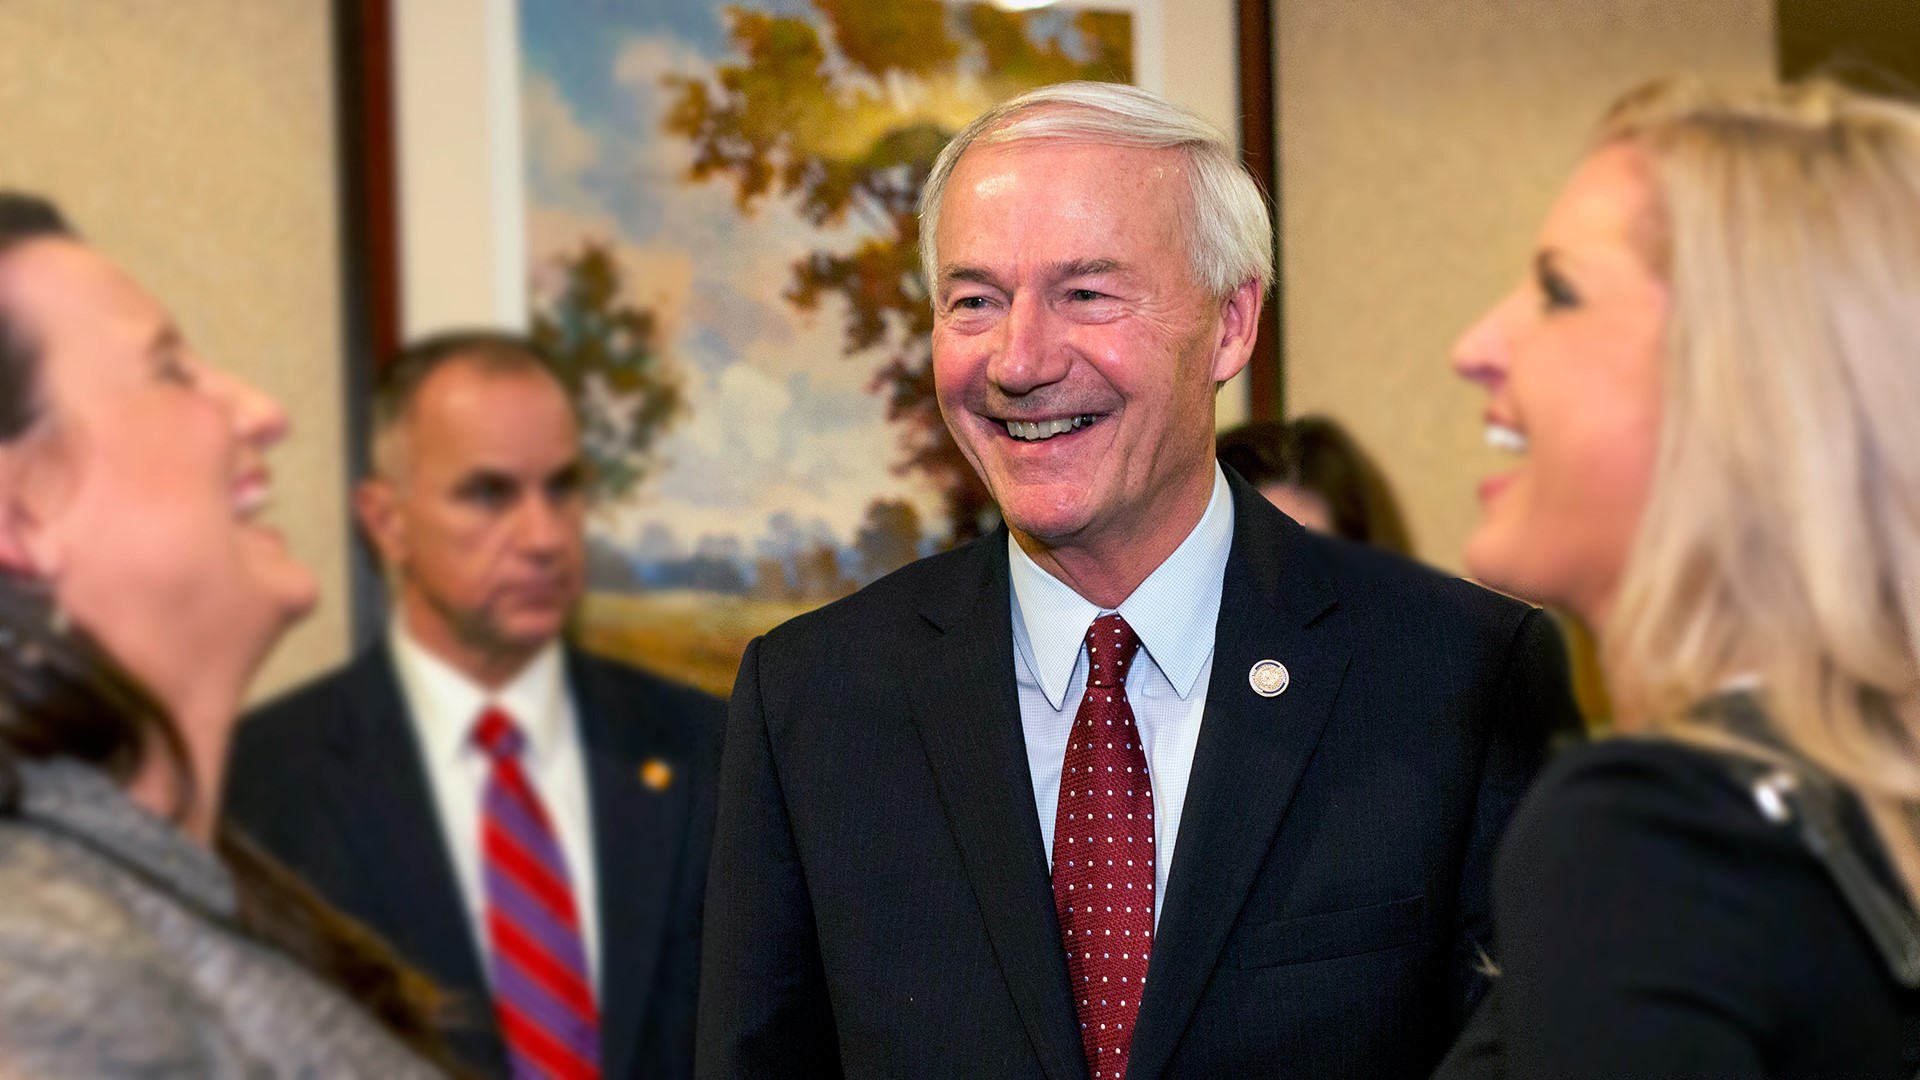 On Friday, Arkansas Governor Asa Hutchinson released his endorsement of Sarah Huckabee Sanders for governor.